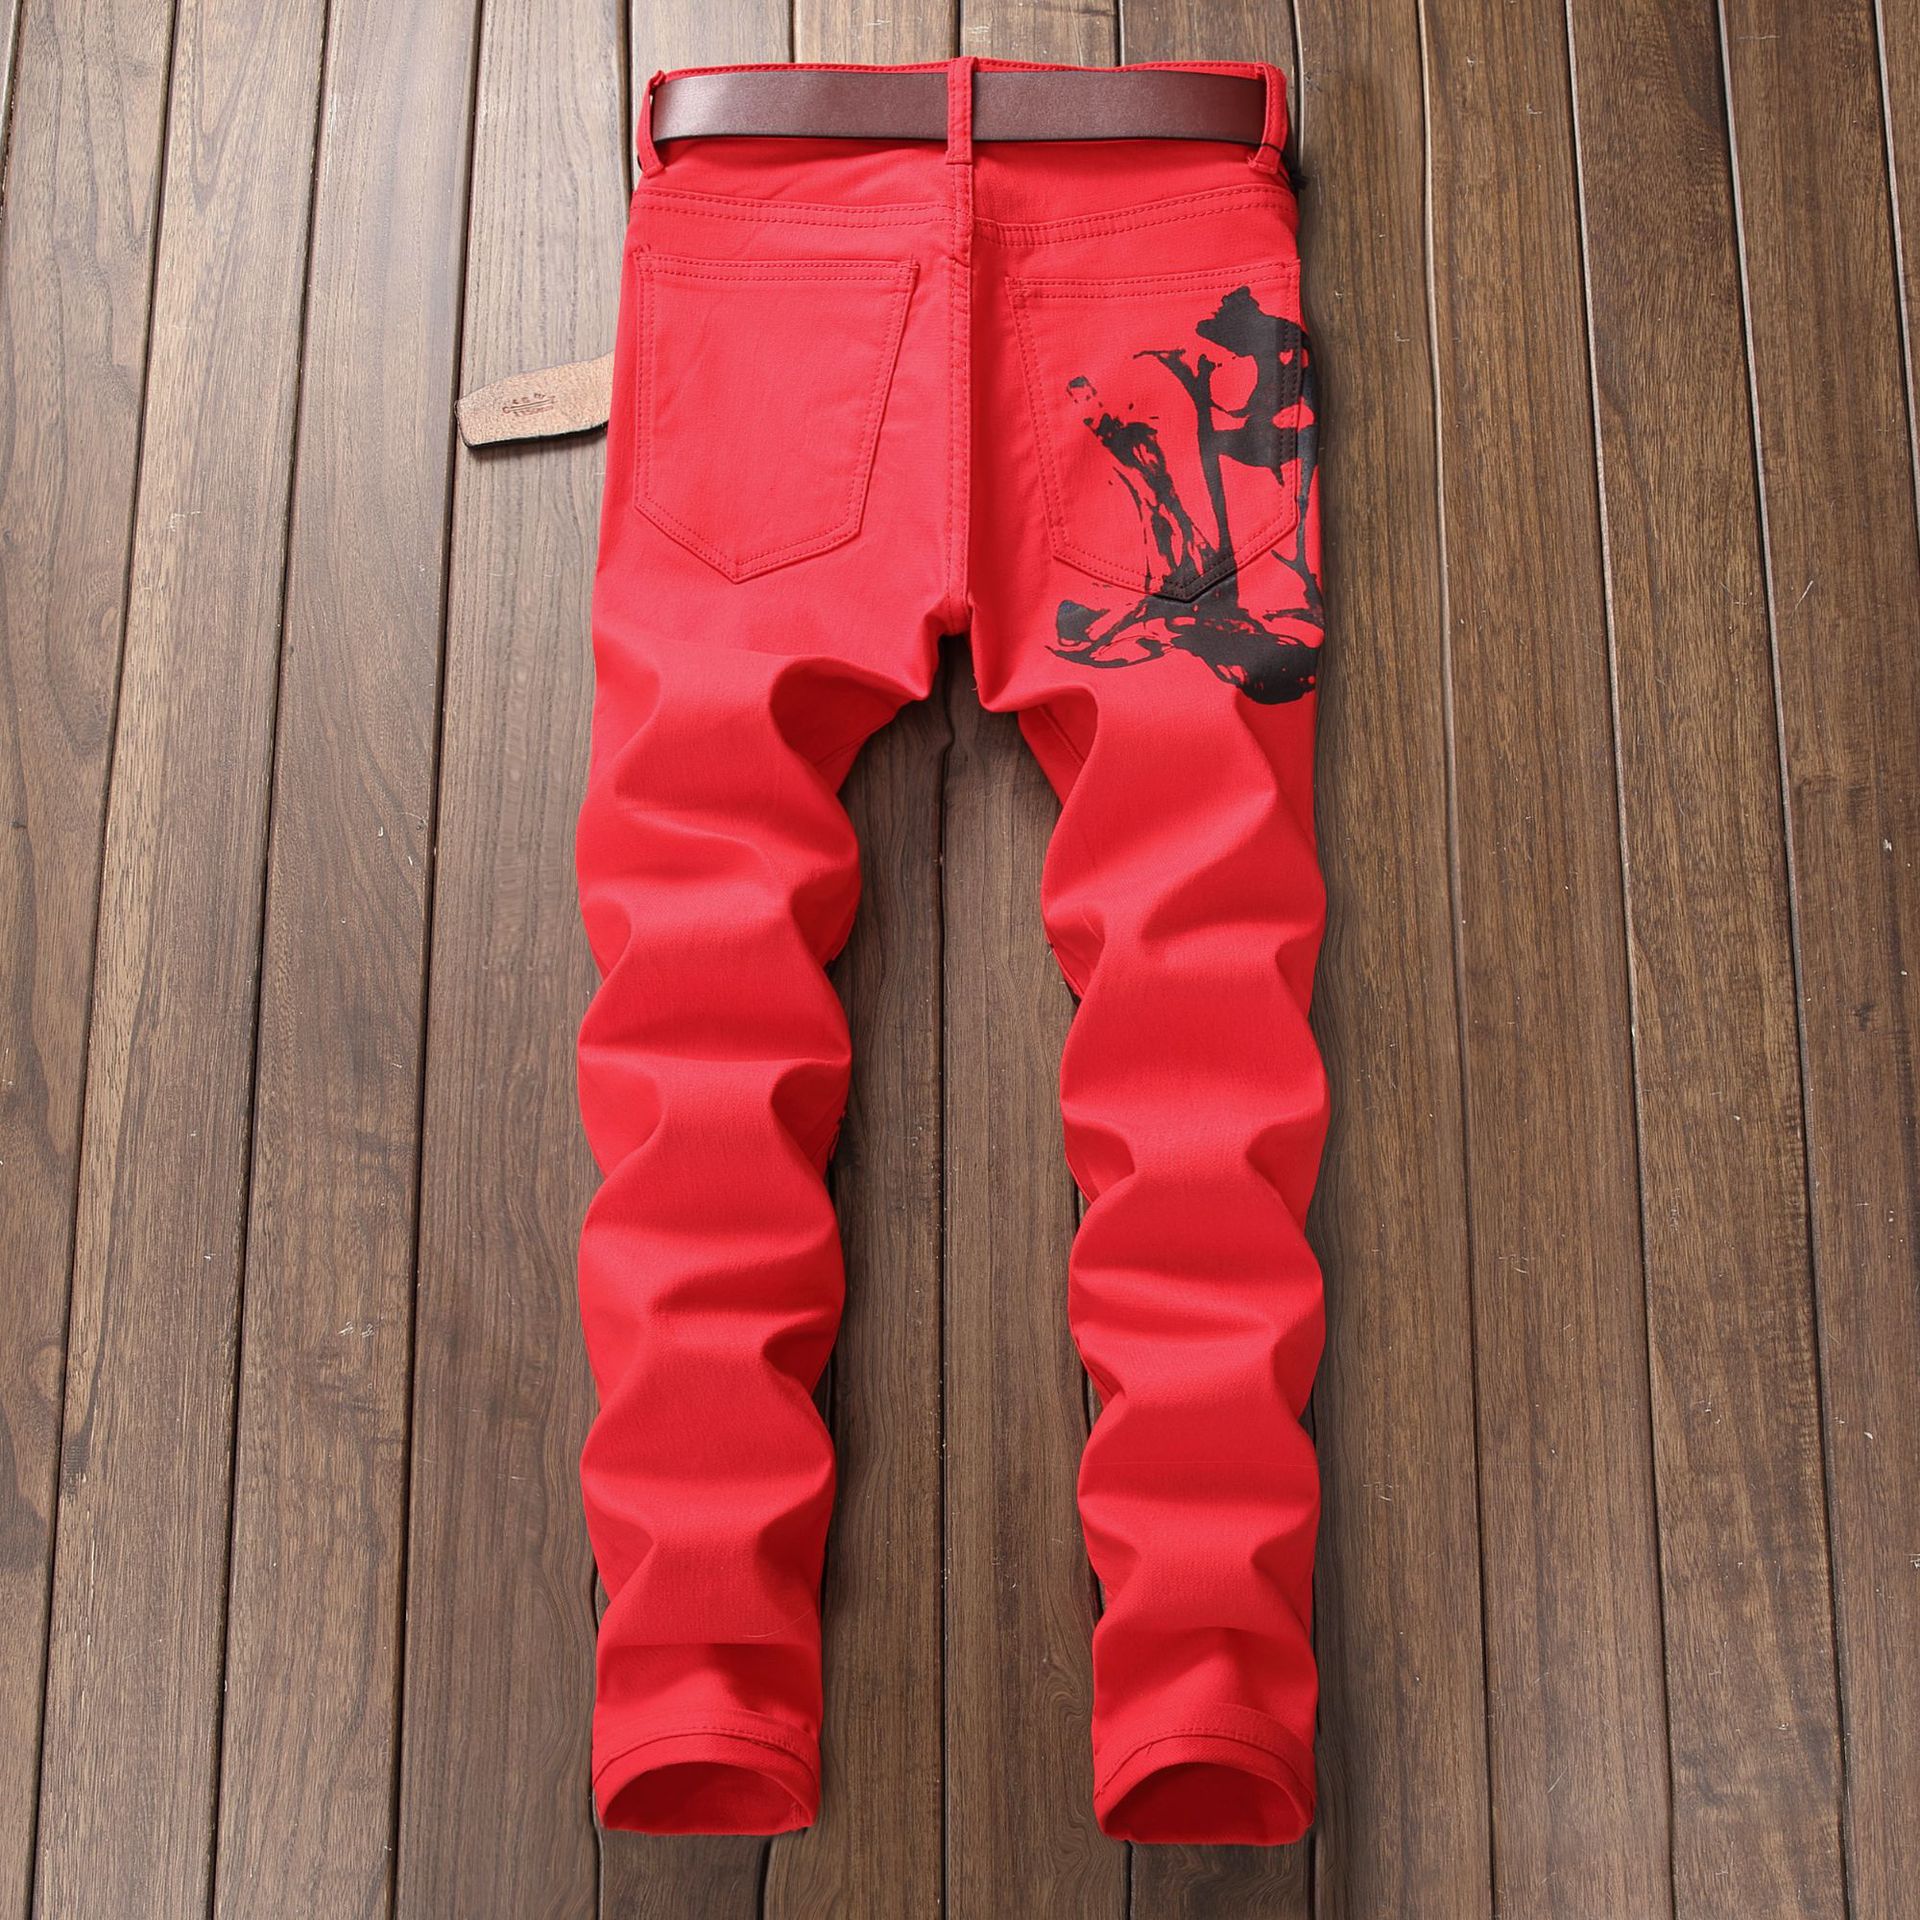 2020 Personality Men'S Black White Red Casual Pants Jeans Jogging Pants ...